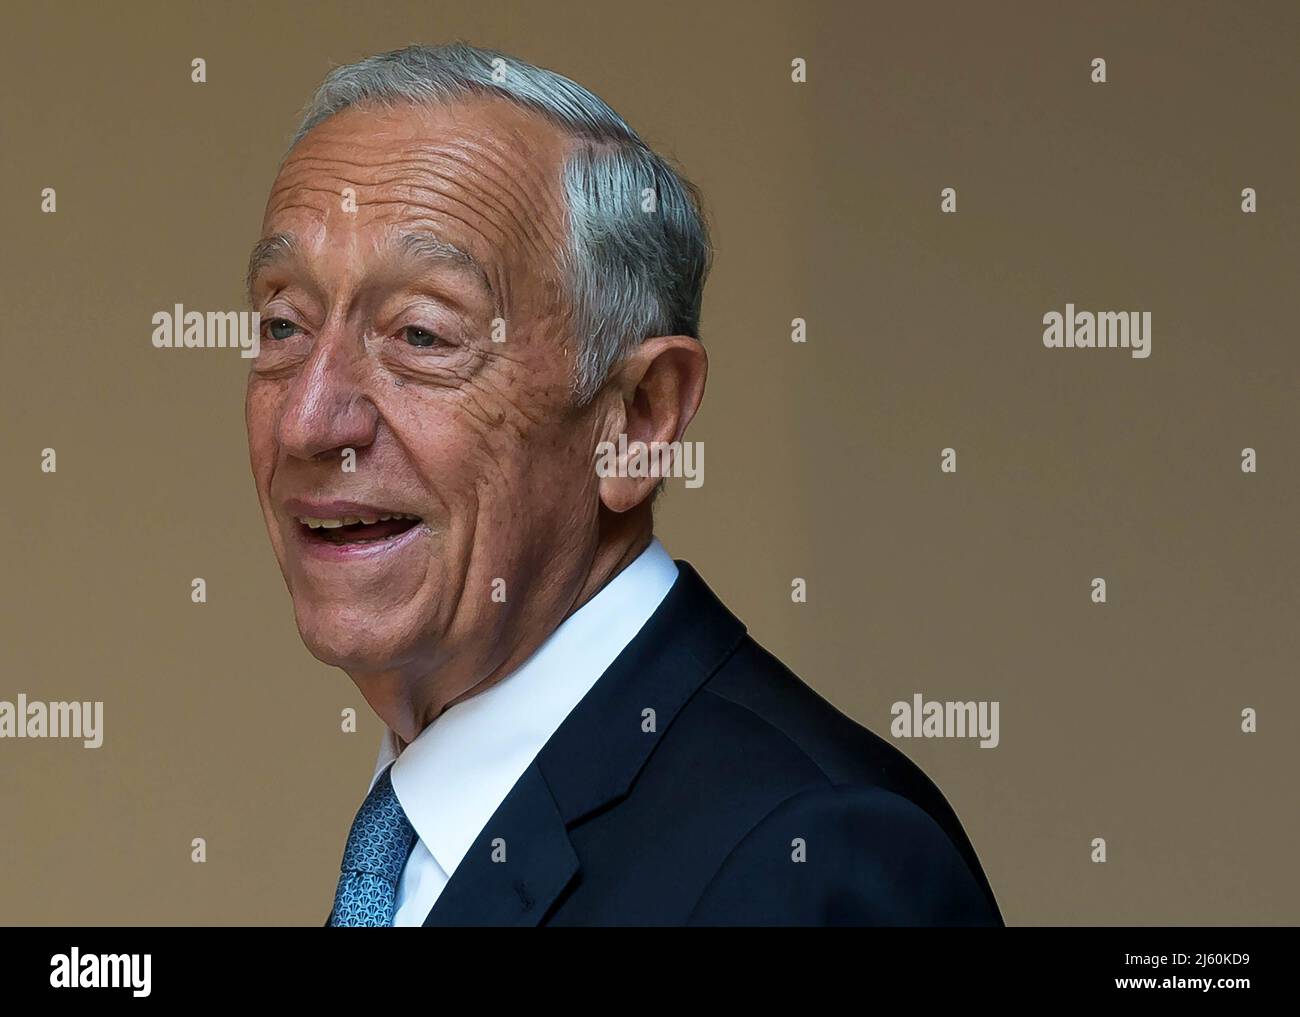 Malaga, Spain. 26th Apr, 2022. Portuguese President, Marcelo Rebelo de Sousa gives a speech during the opening of the exhibition of Portuguese painter and illustrator Paula Rego, at Picasso Museum. The exhibition 'Paula Rego', shows her view on figurative art and the representation of women with more than 80 works. The showing will run at Picasso Museum from 27 April to 21 August. Credit: SOPA Images Limited/Alamy Live News Stock Photo